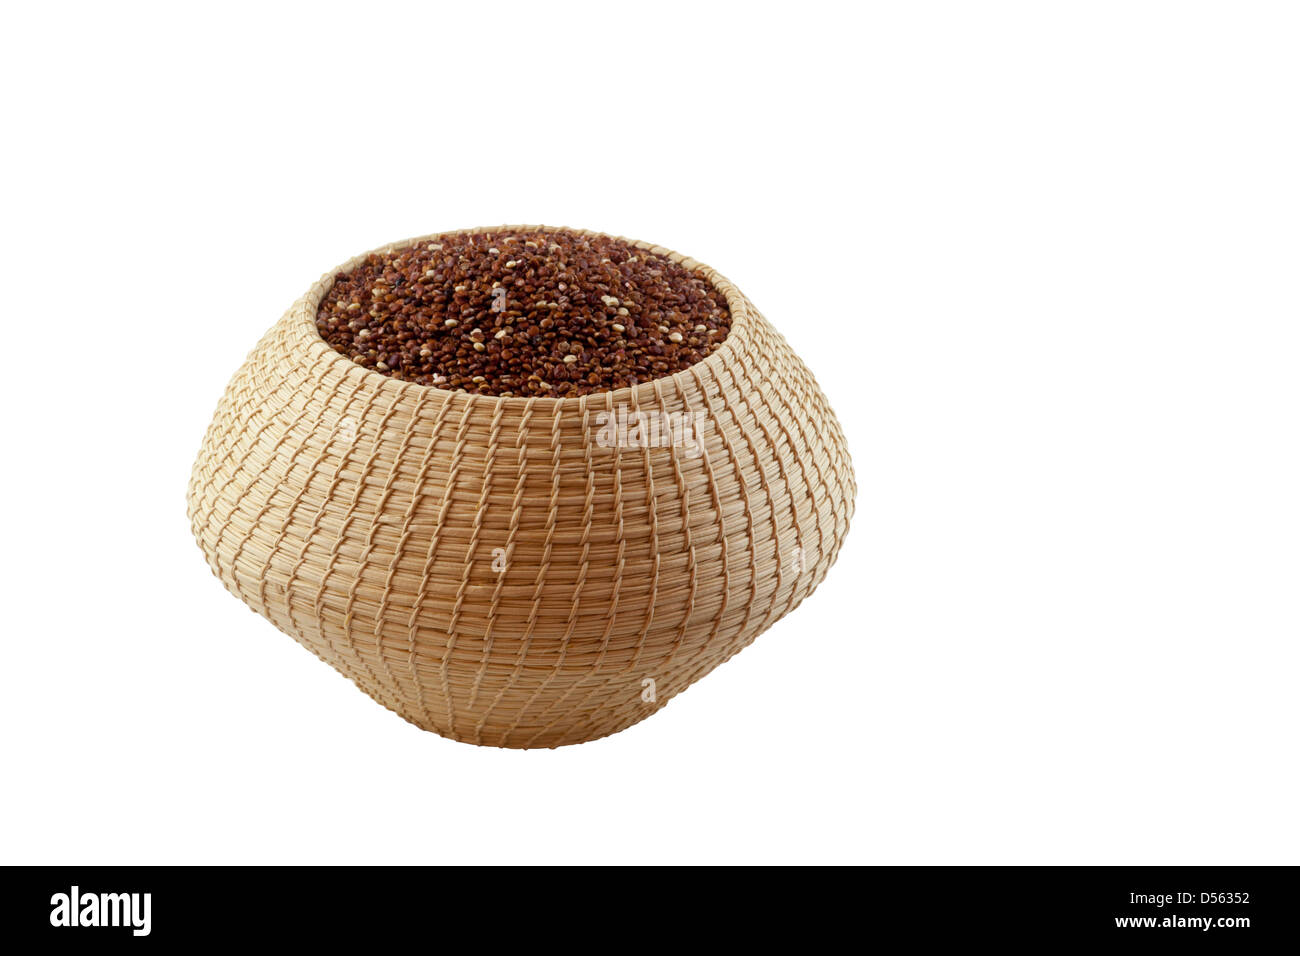 Organic red Quinoa (Chenopodium quinoa) in a Mayan basket made in Lubaantun, Belize, on a white background Stock Photo